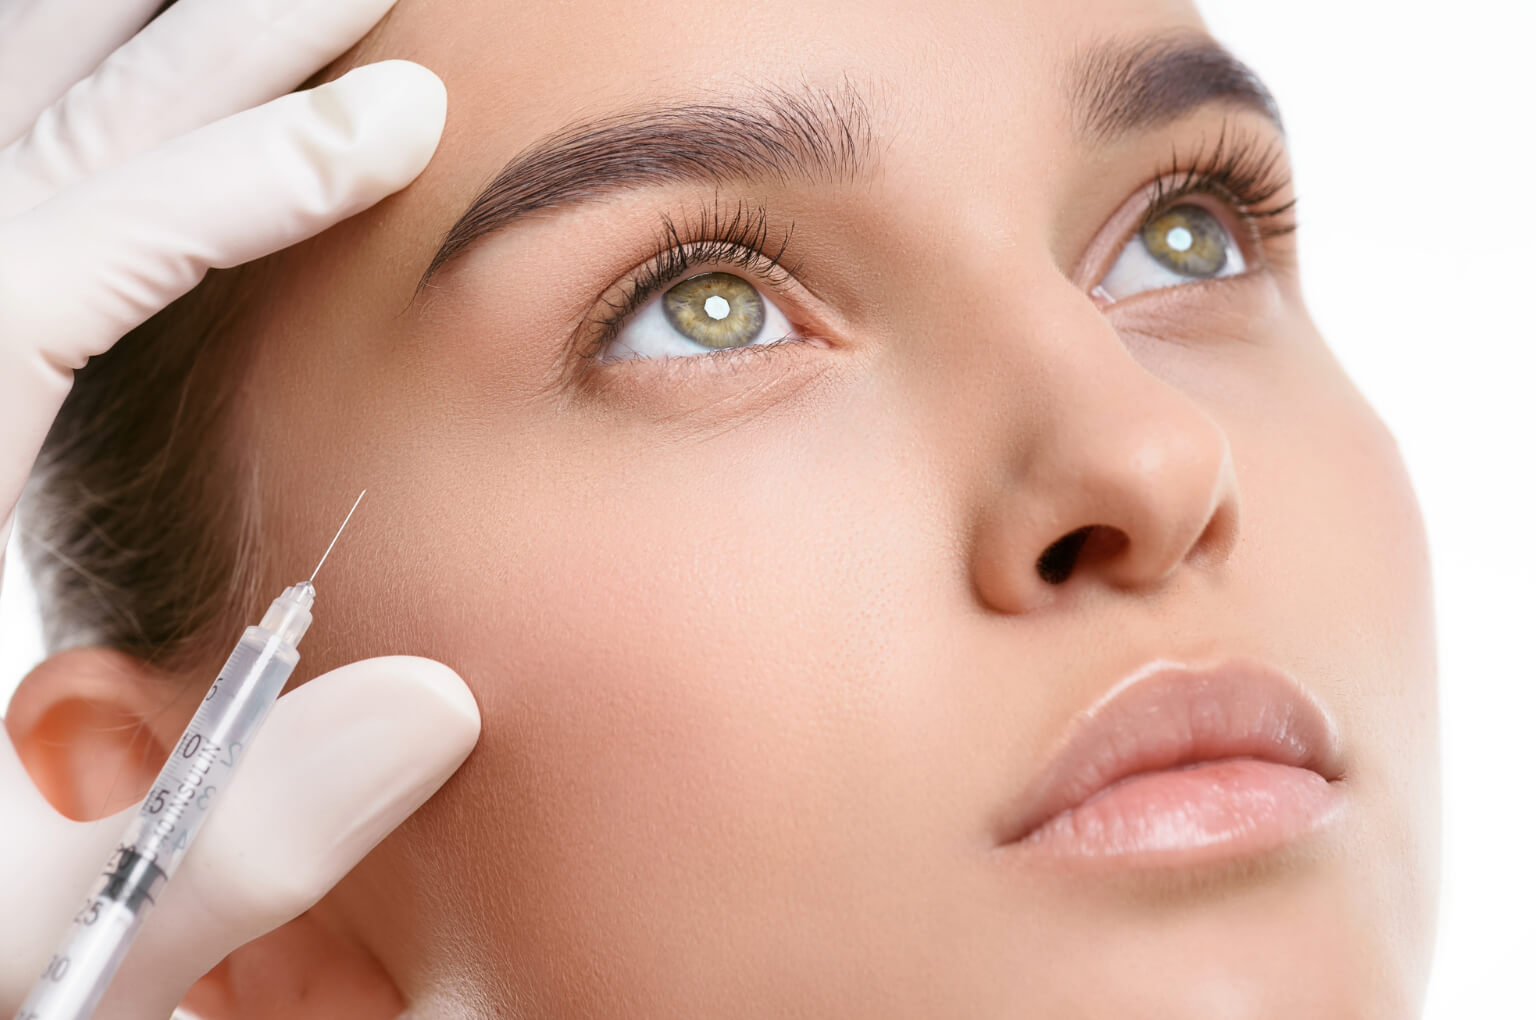 At what age is it appropriate to begin using Botox?